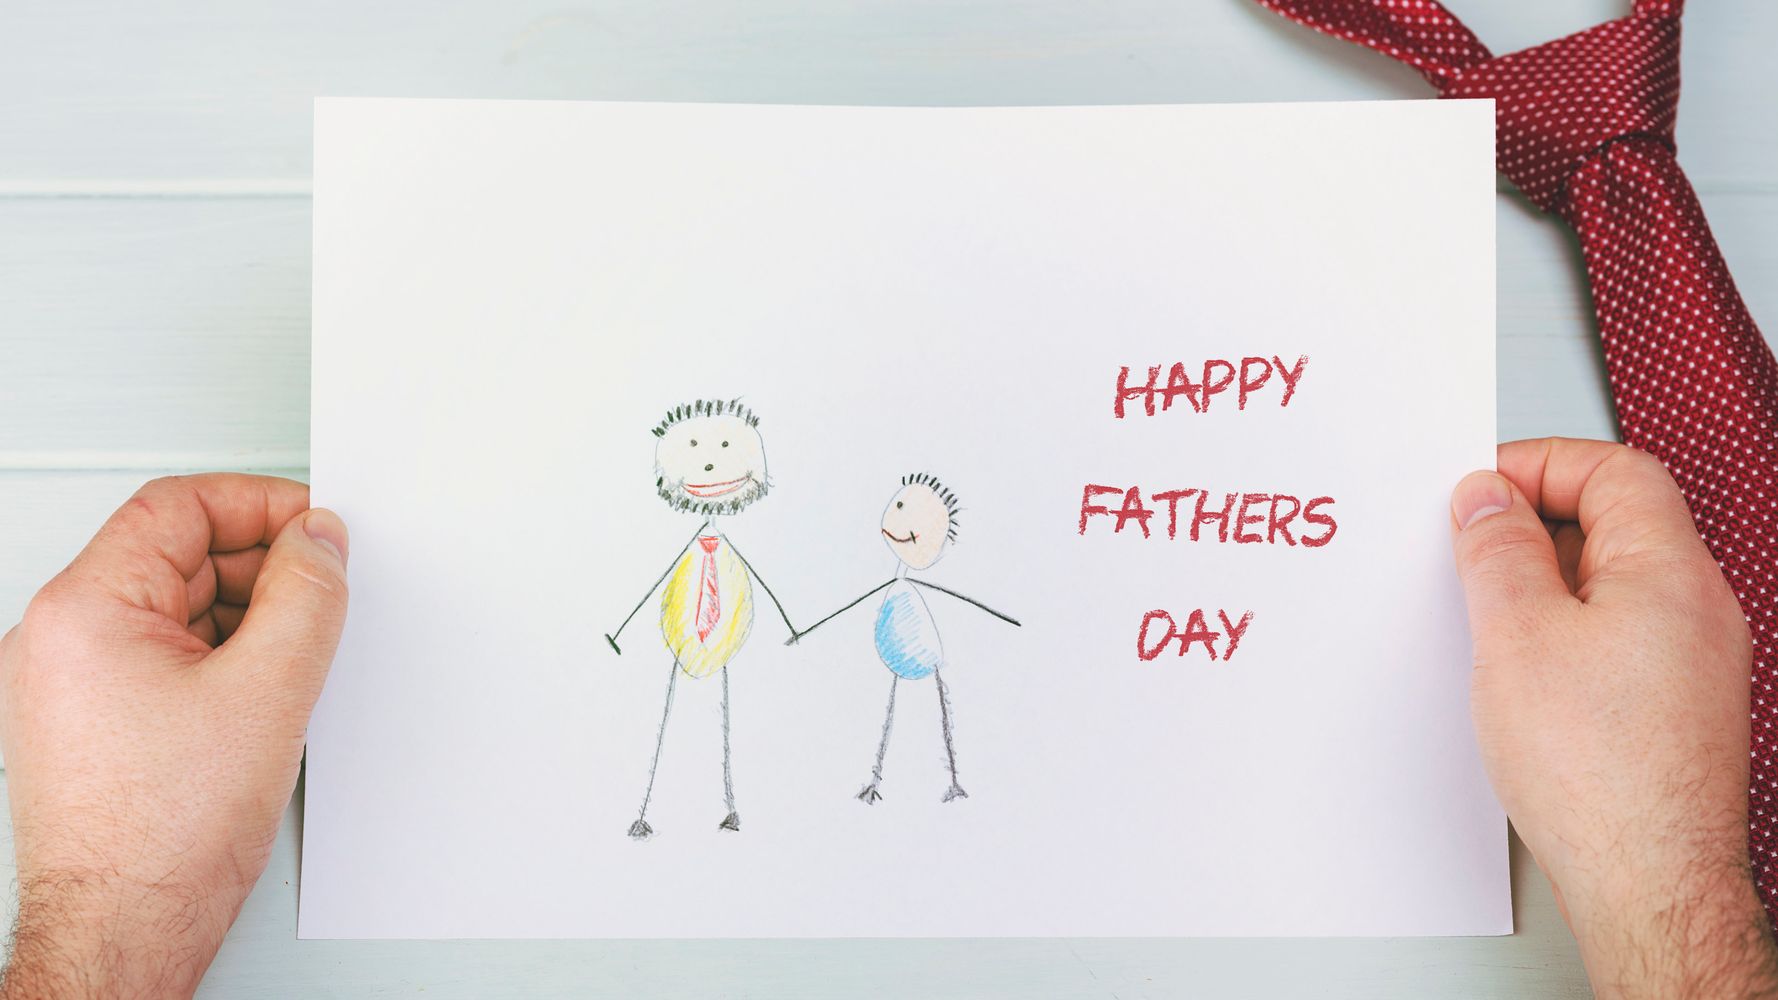 dad,healthy living,dad happiness advice,father's day,sleep + wellness,happiness...